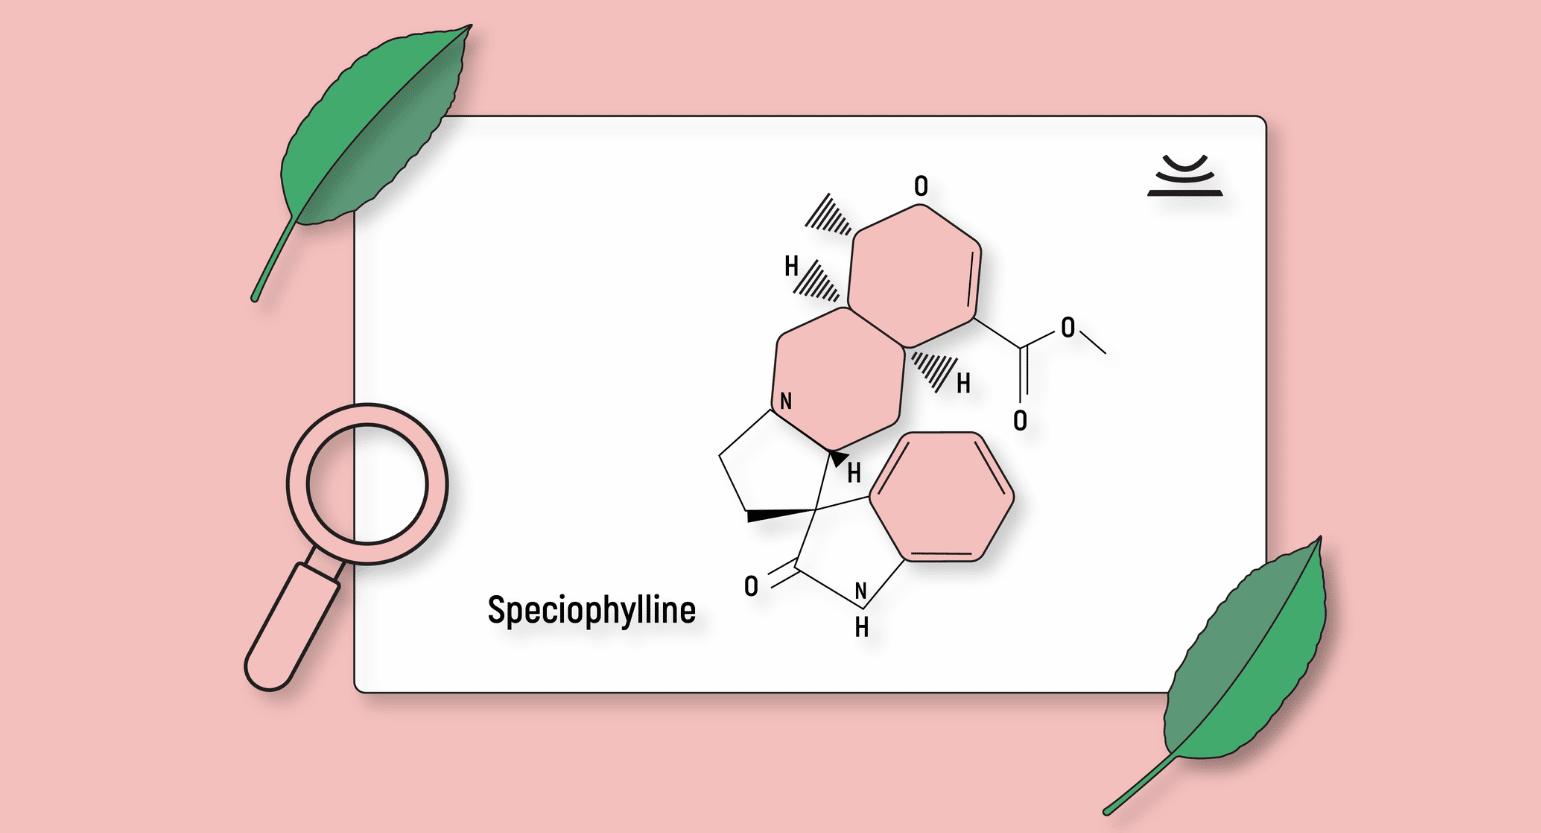 Speciophylline: What Do We Know About This Kratom Alkaloid?